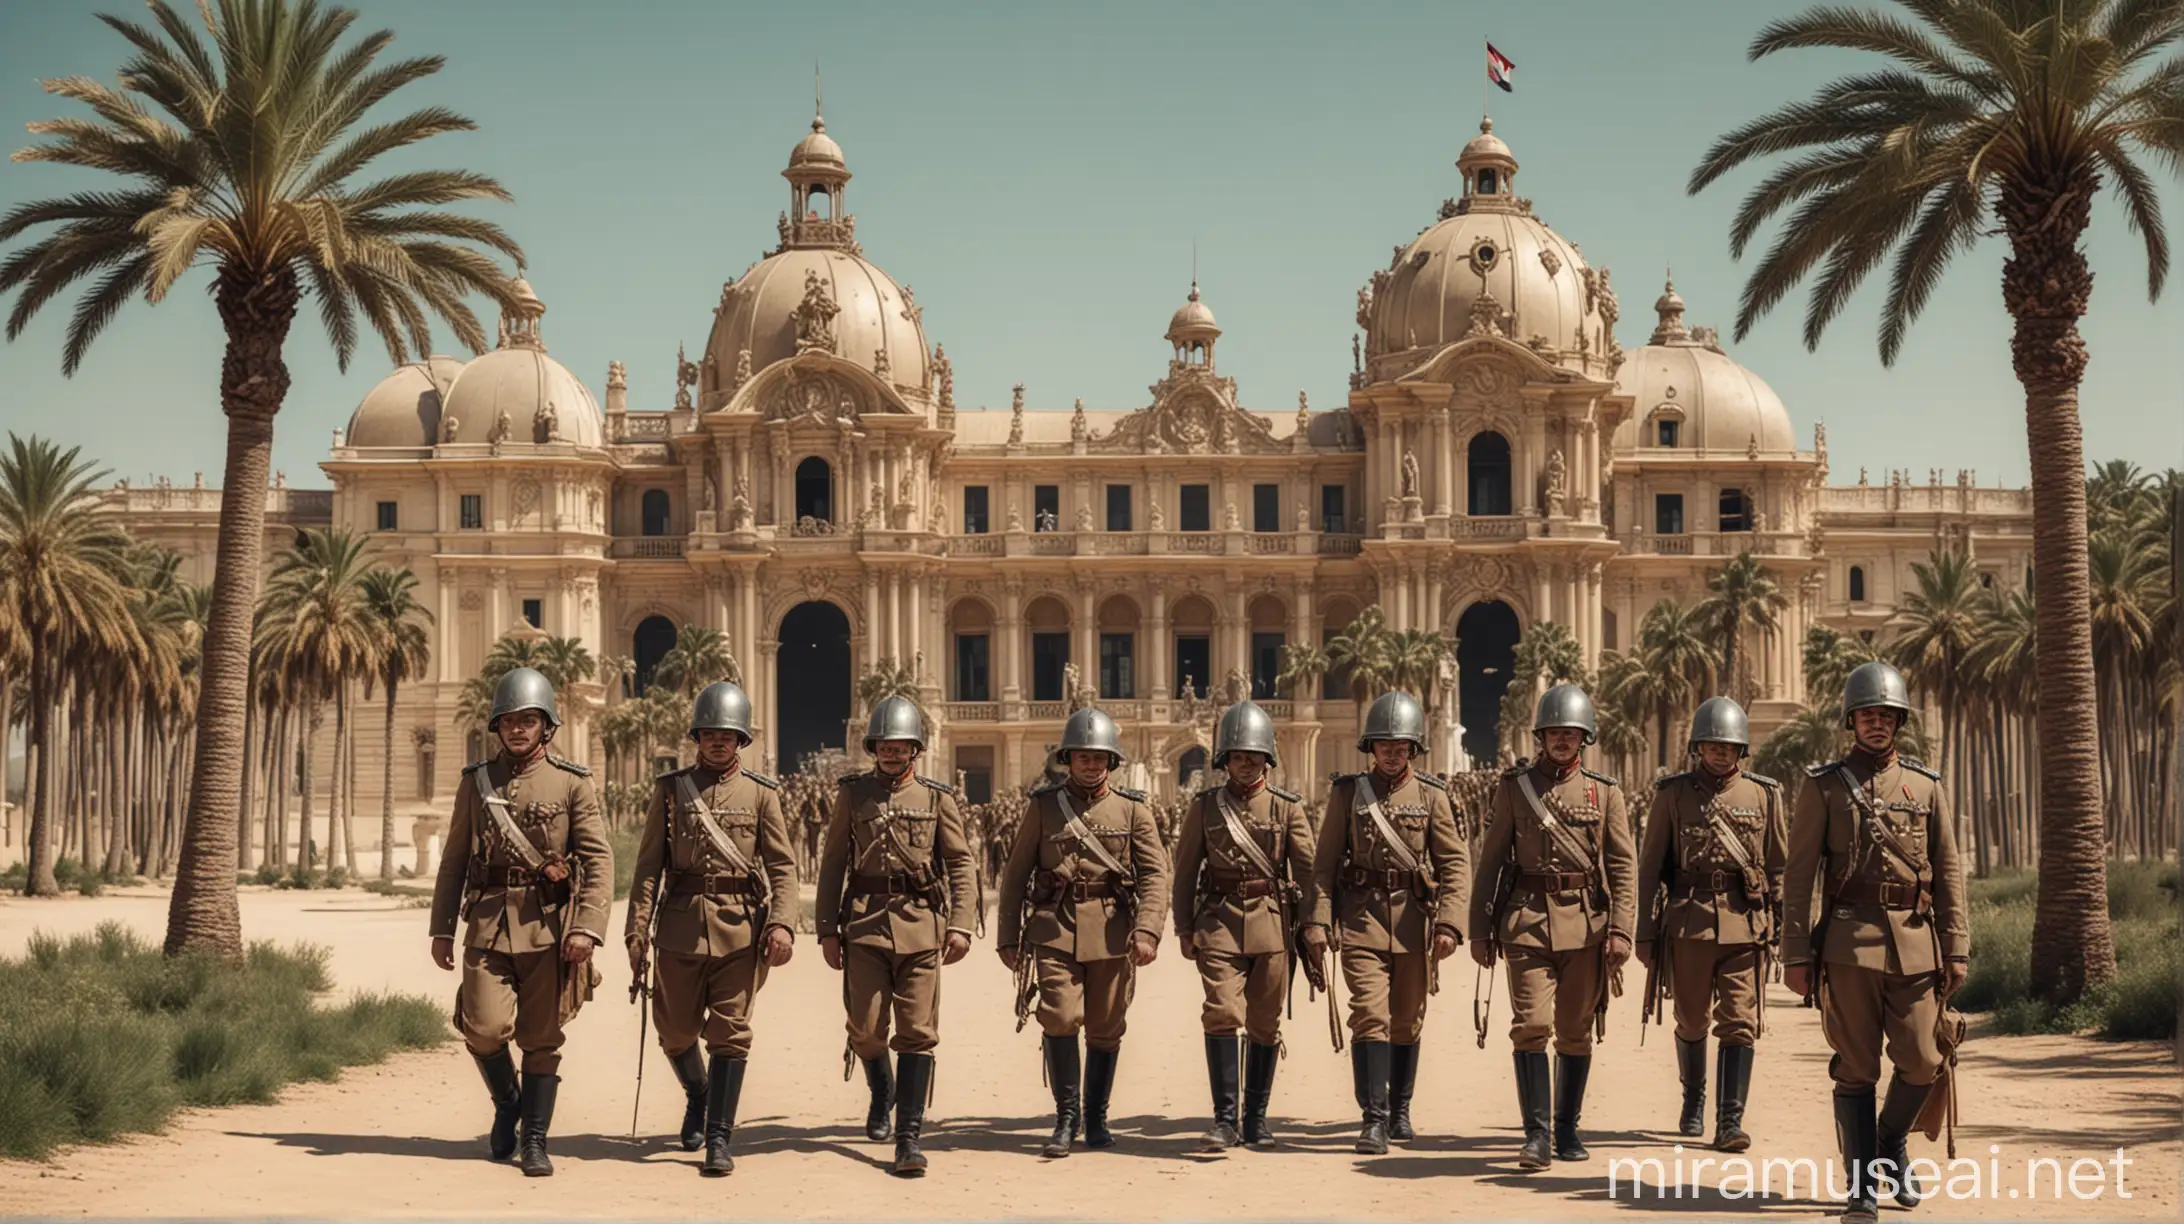 Steampunk German Colonial Soldiers Marching on French Baroque Palace in Desert Oasis